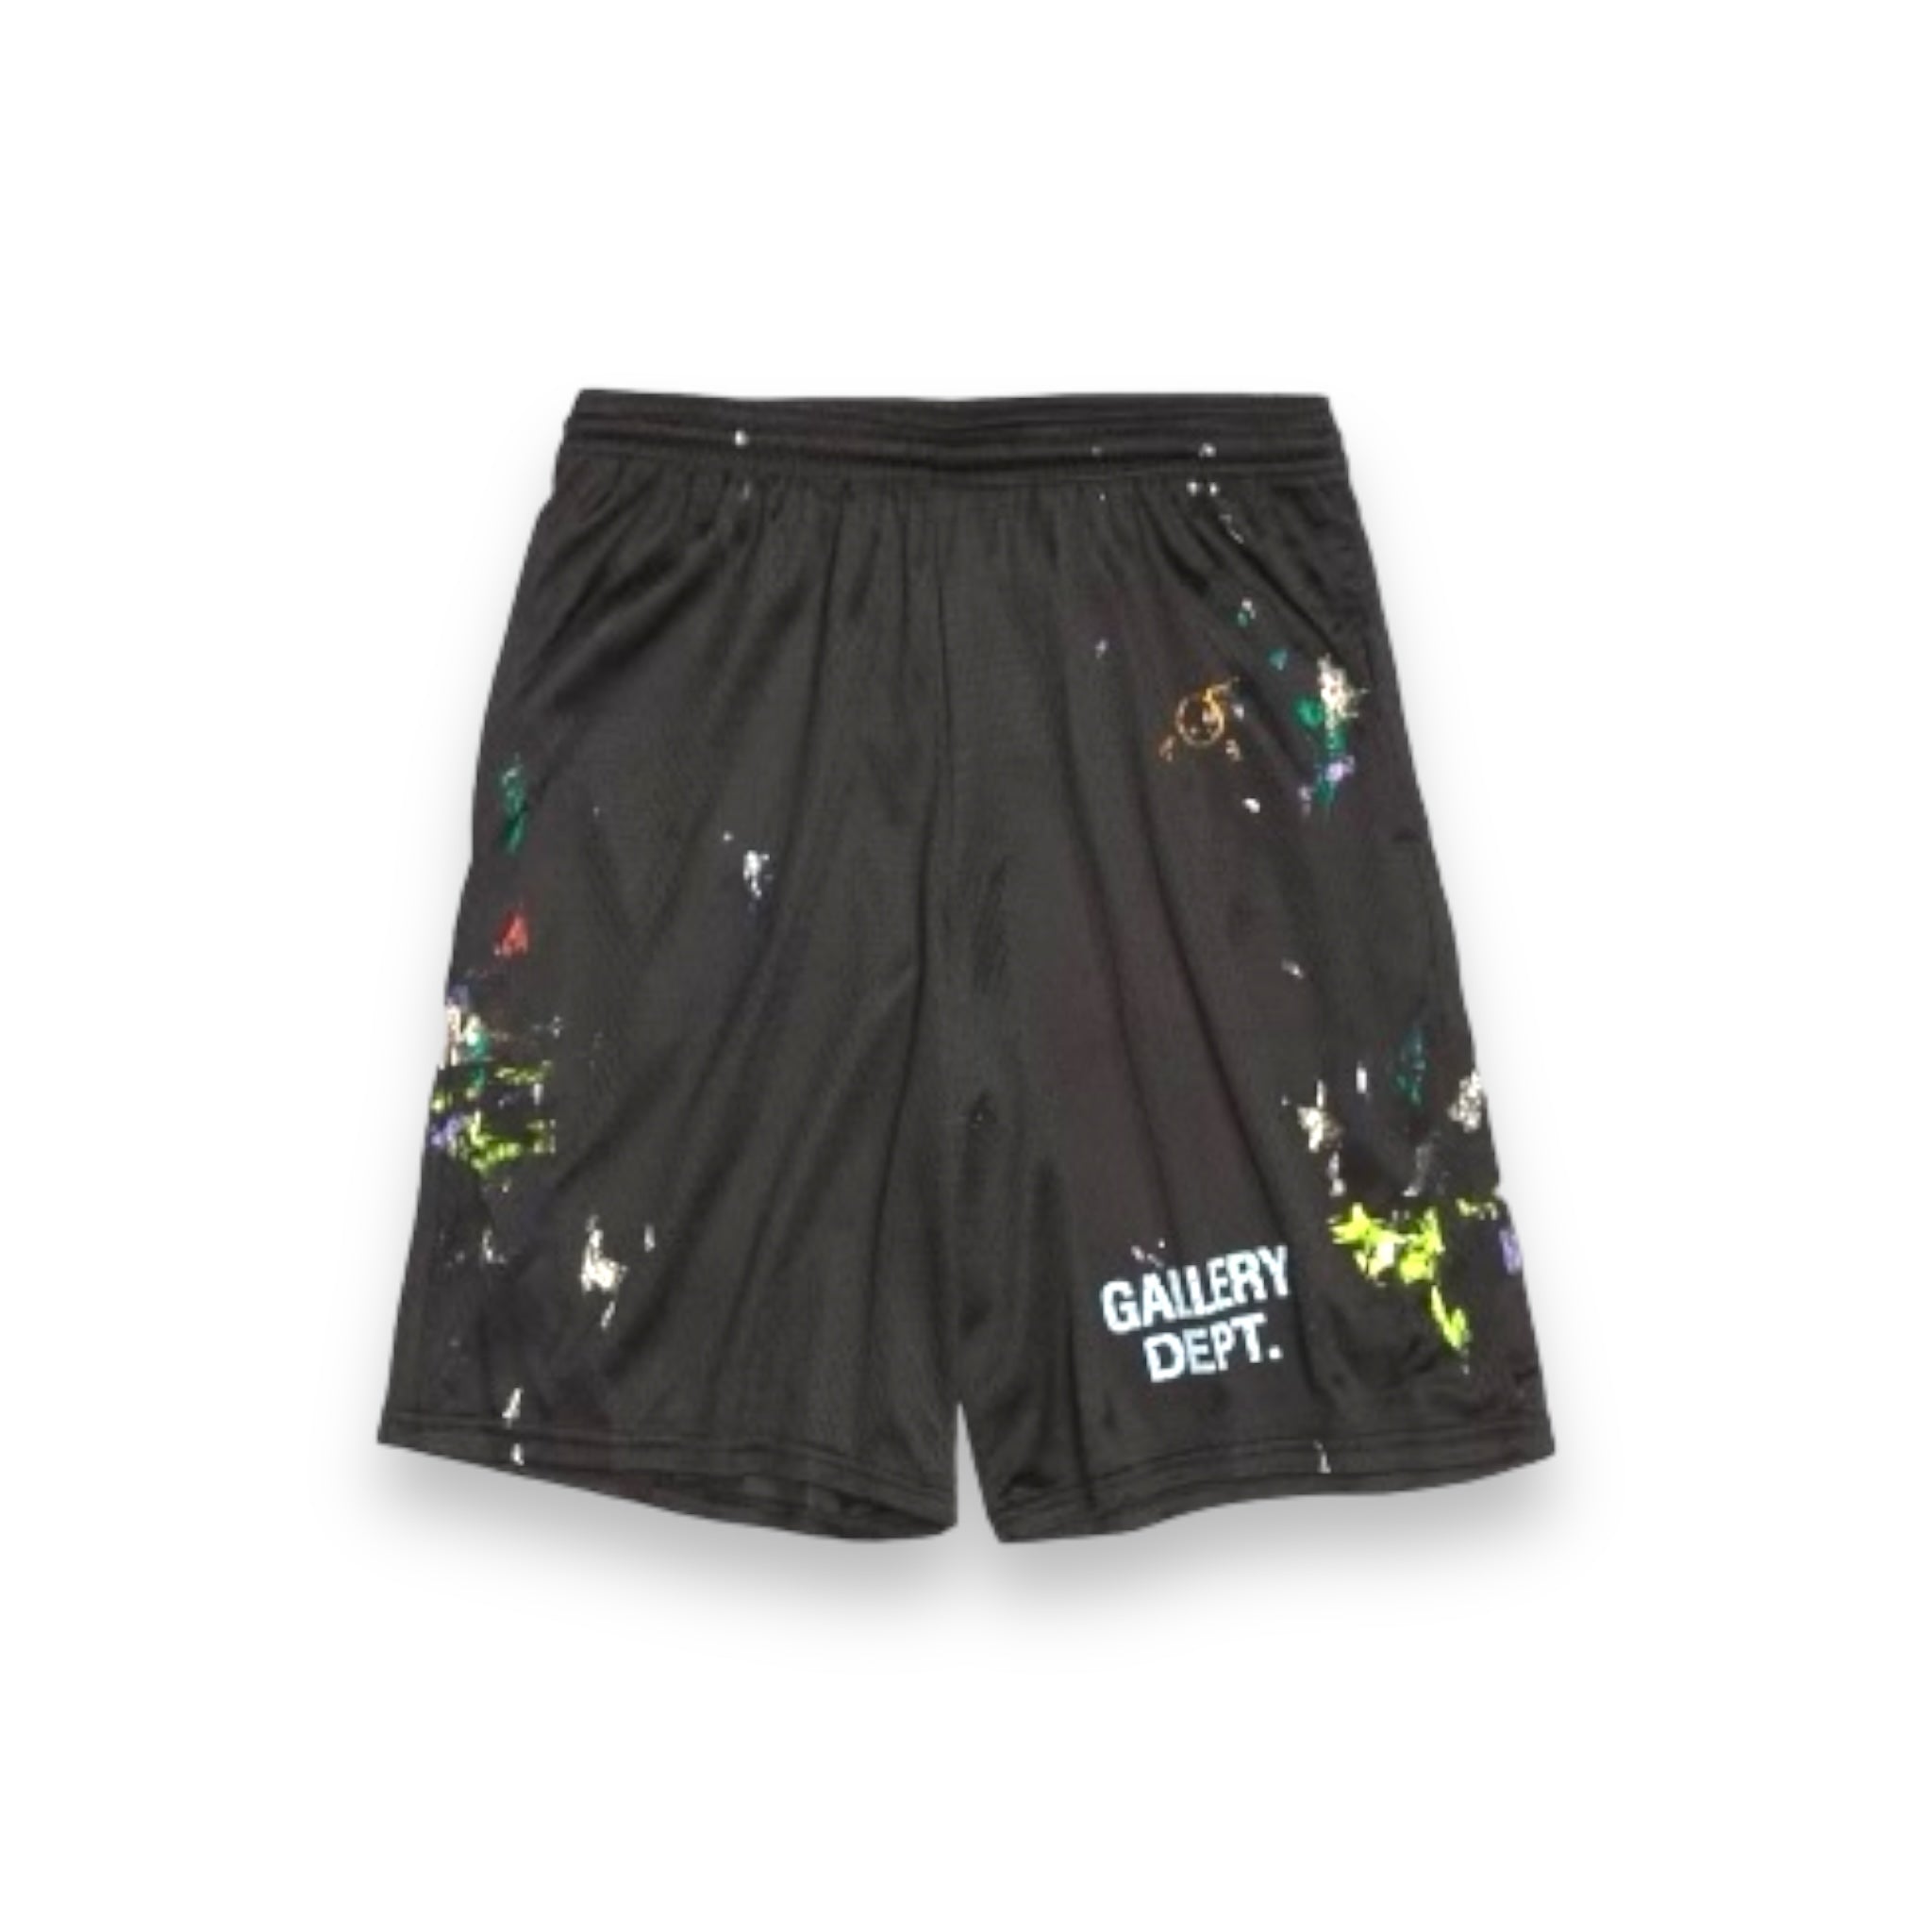 Gallery Dept Gym Paint Shorts